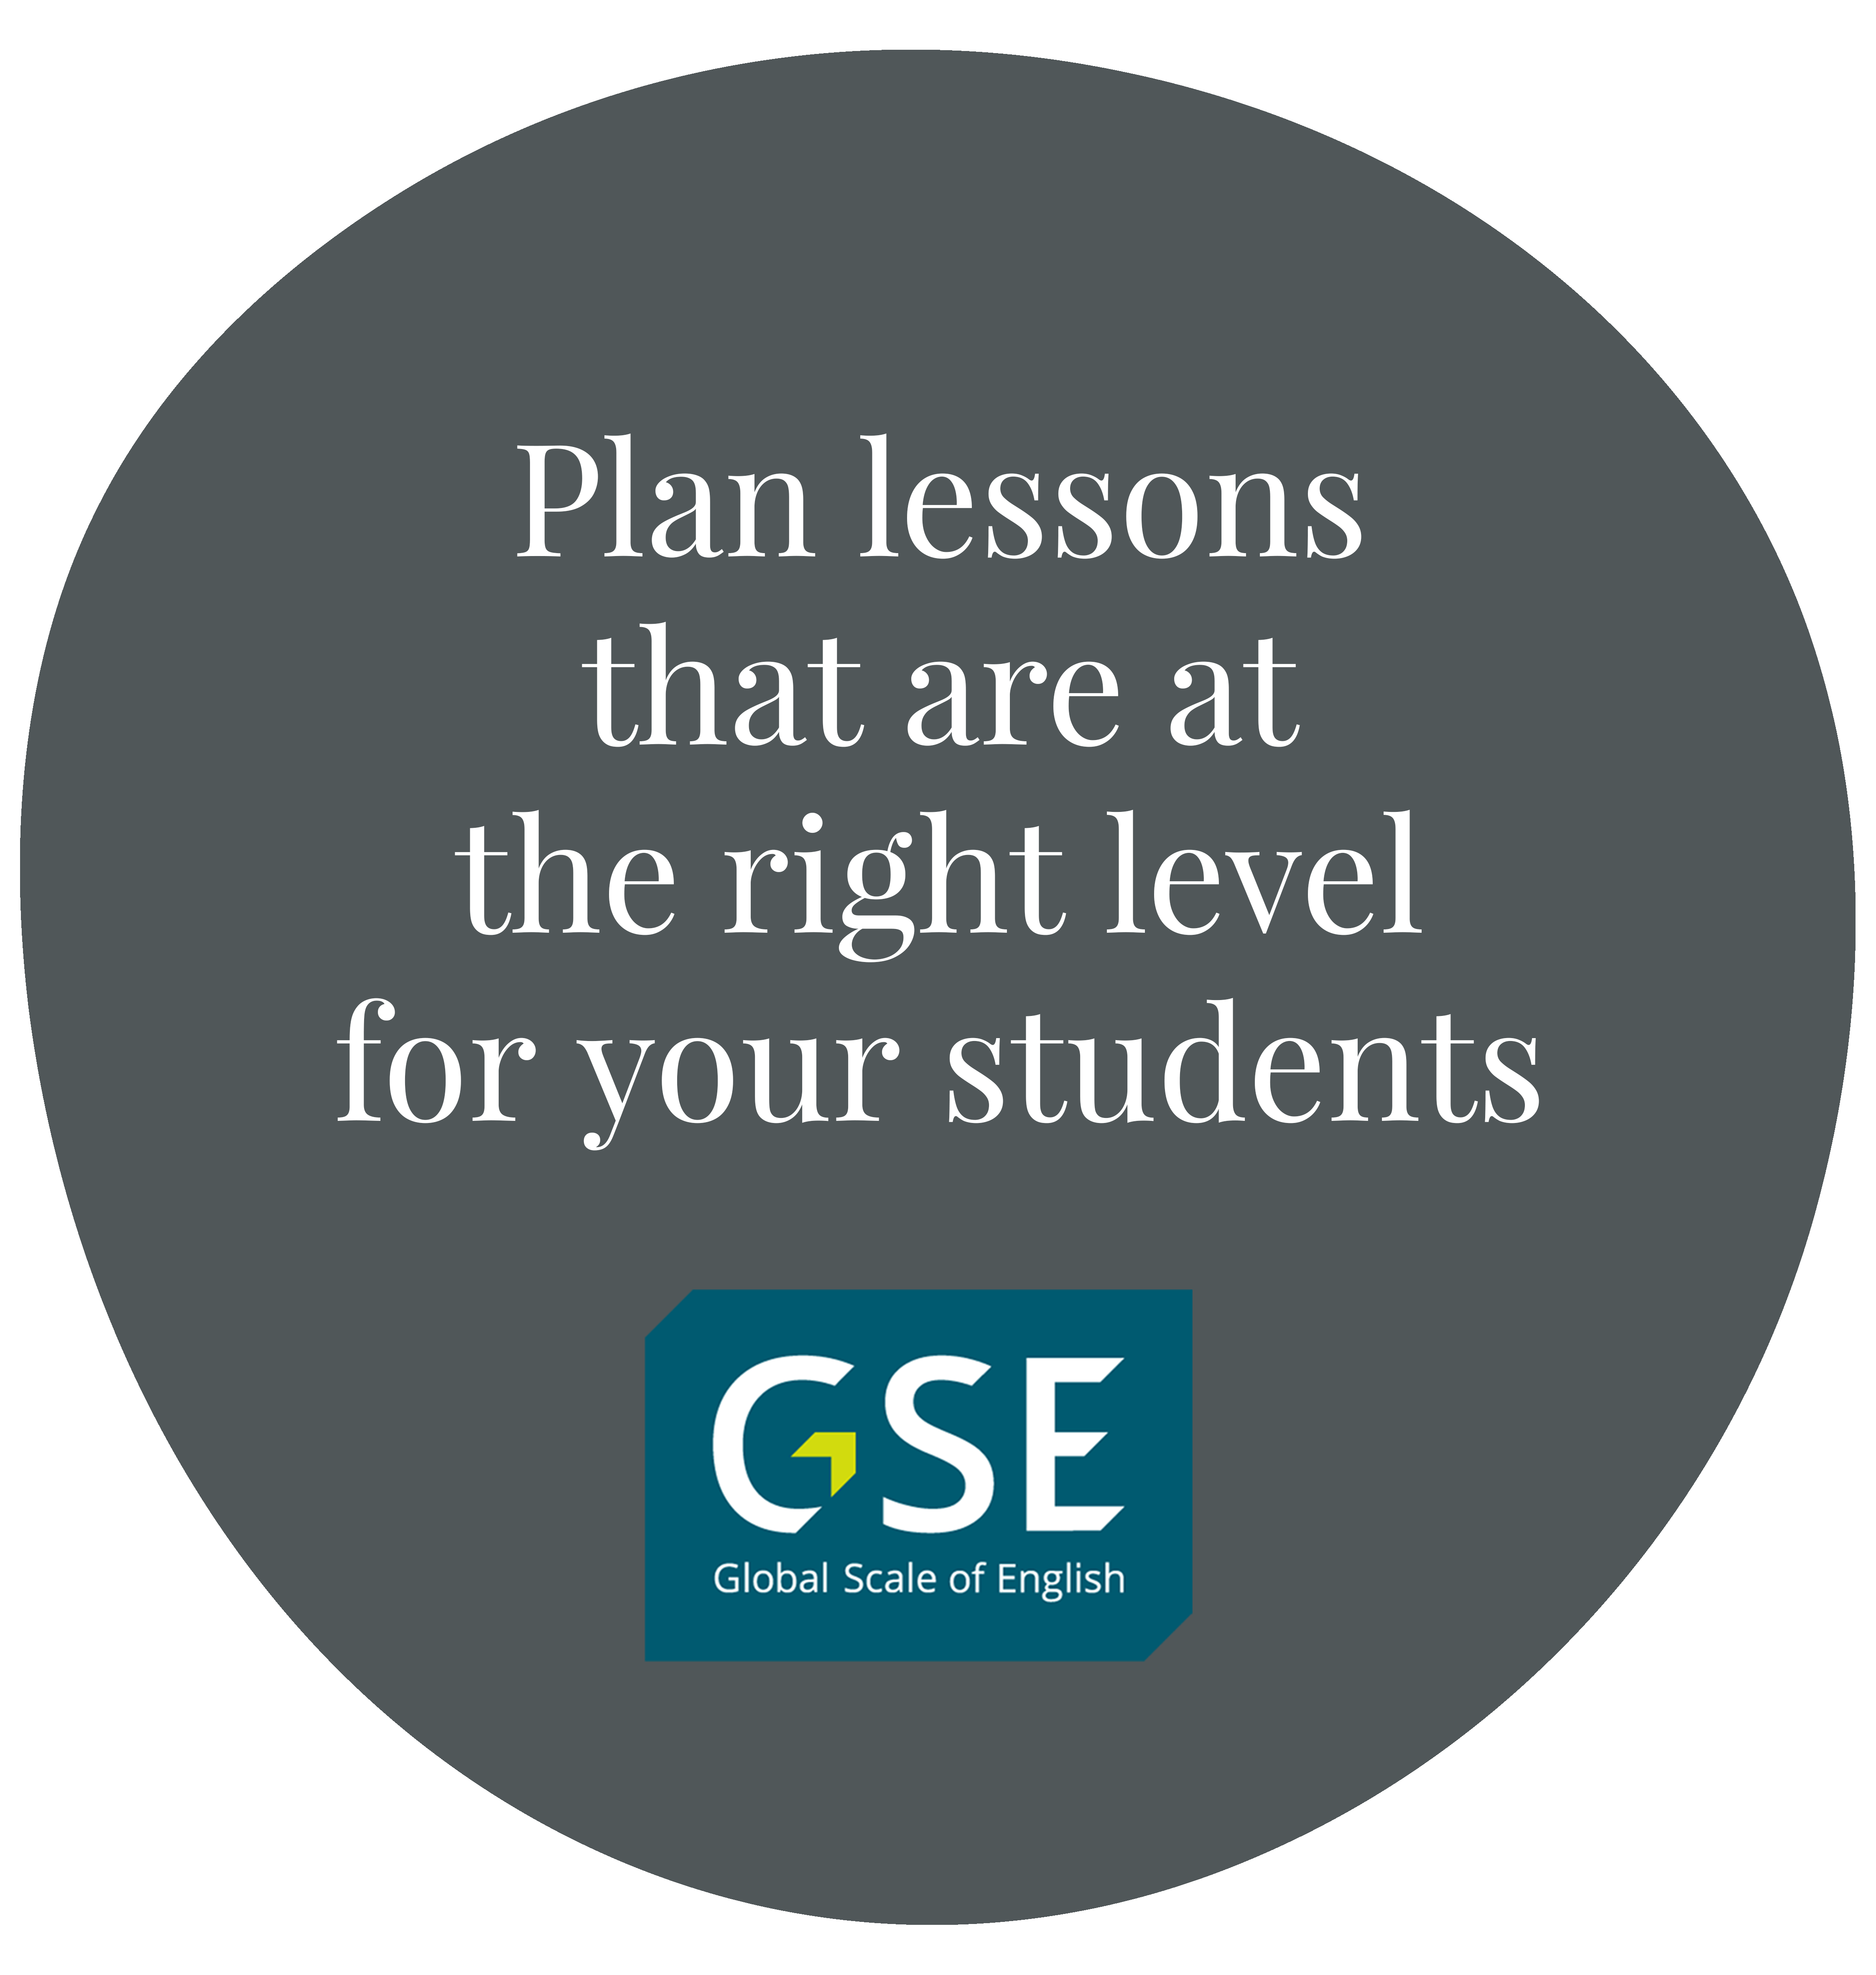 Plan lessons that are at the right level for your students